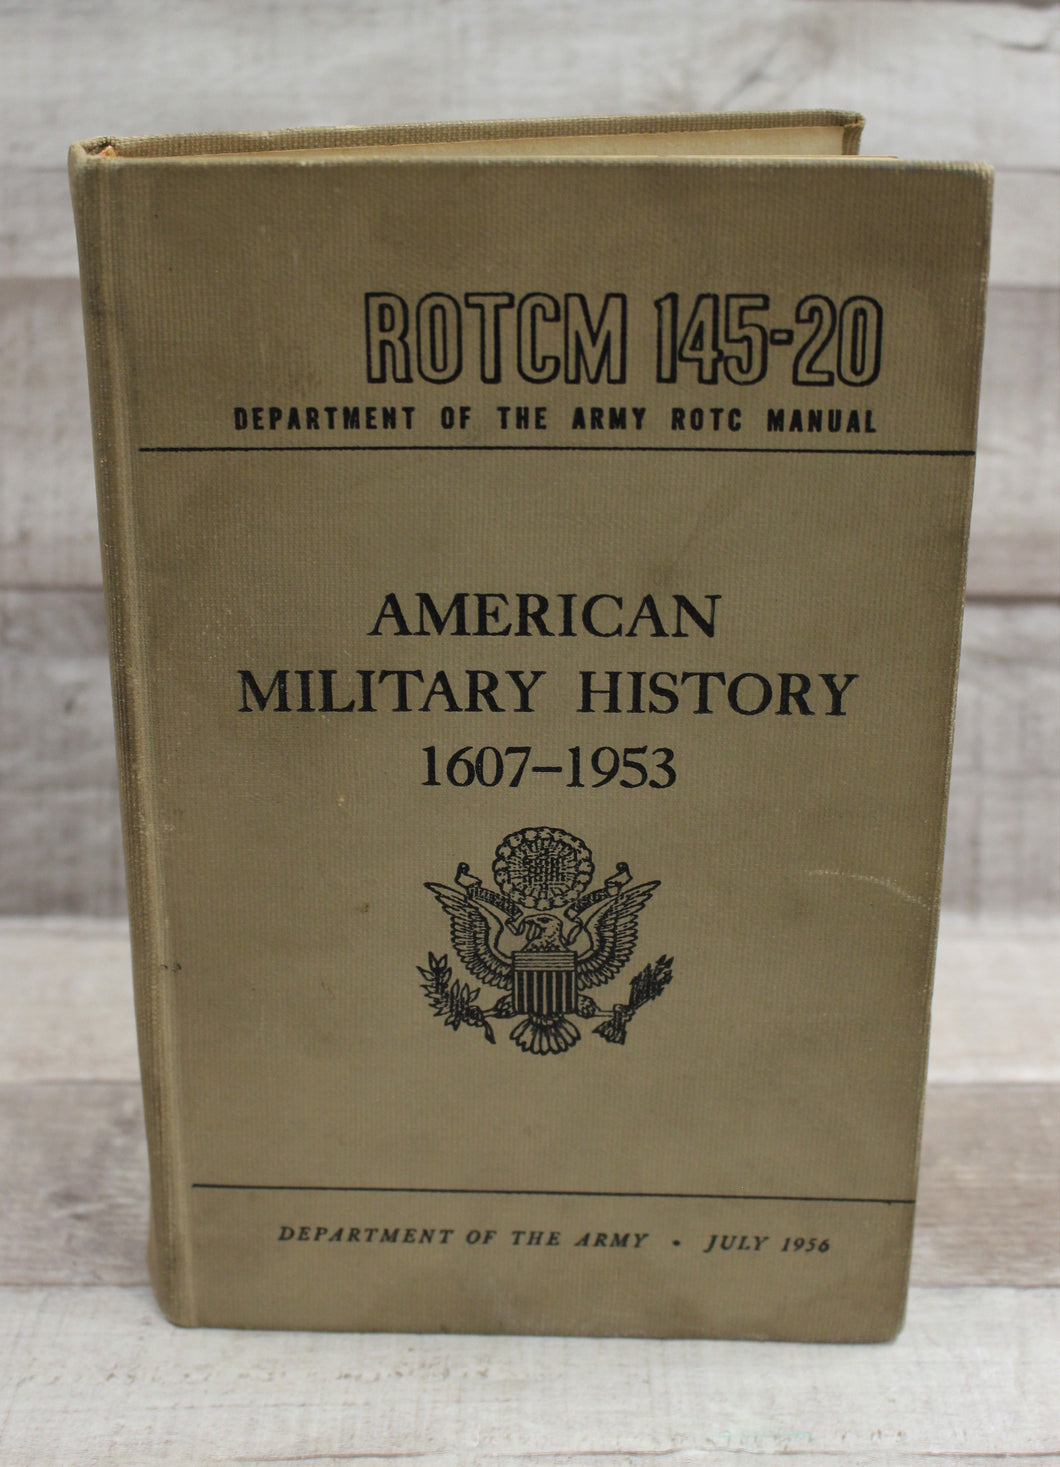 Army ROTC American Military History 1607-1953 - ROTCM 145-20 - Used